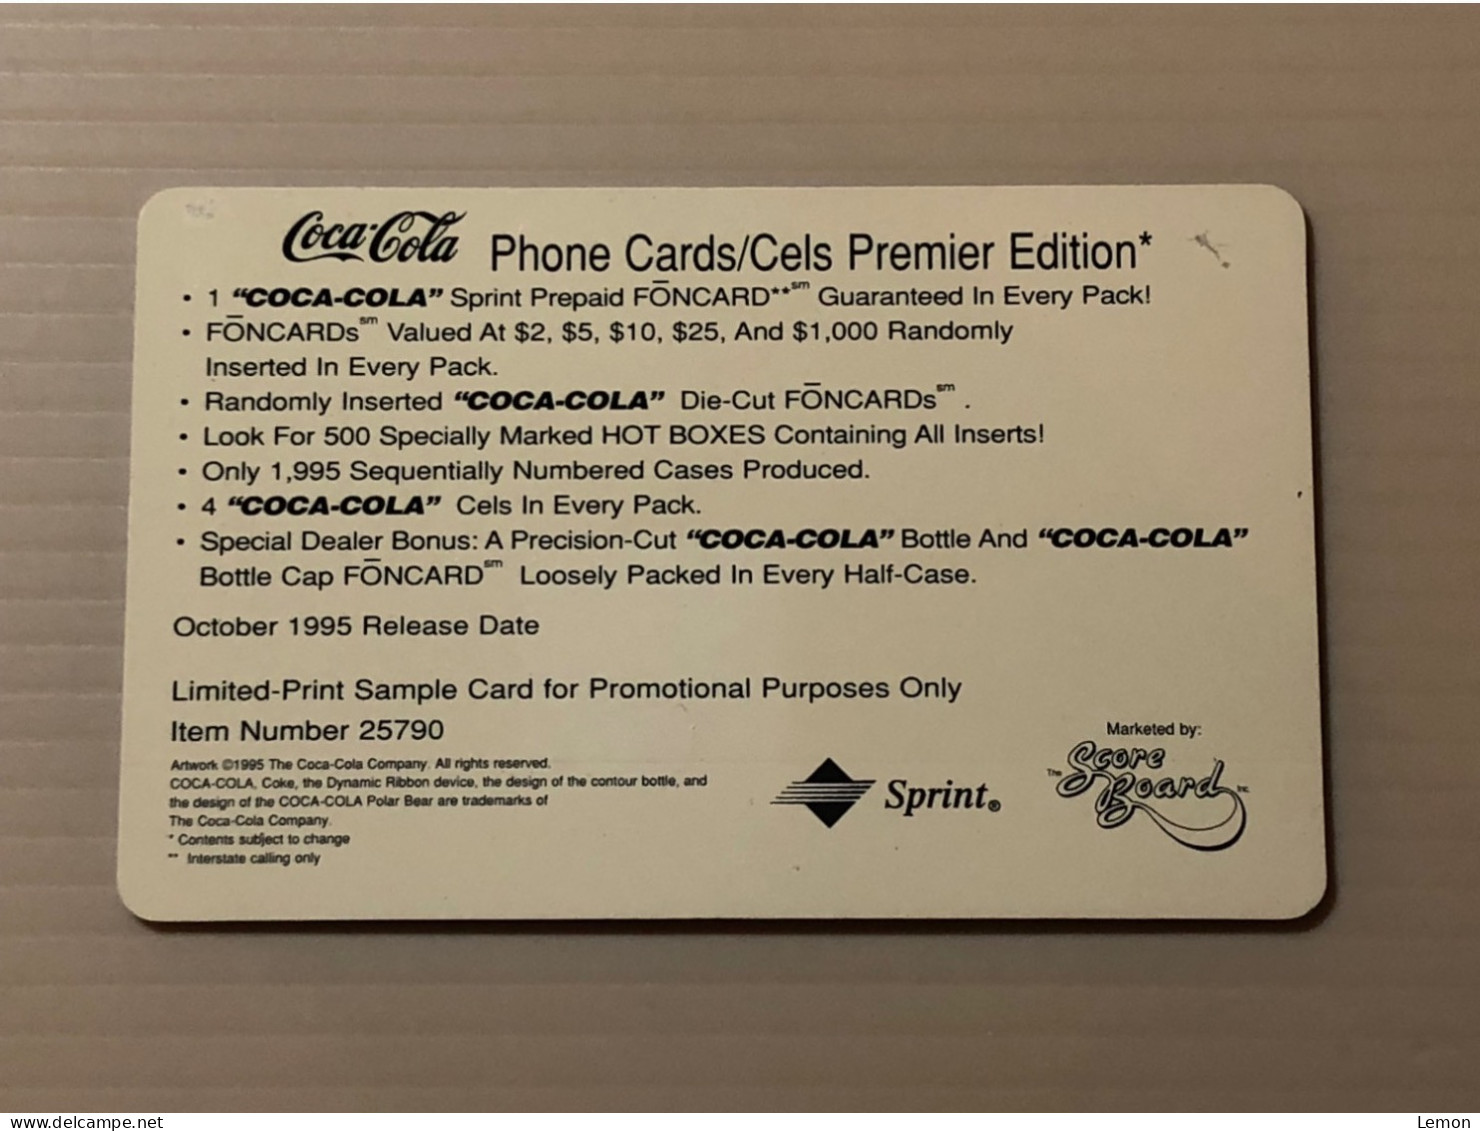 Mint USA UNITED STATES America Prepaid Telecard Phonecard, COCA COLA BEAR 25 DOLLARS SAMPLE CARD, Set Of 1 Mint Card - Collections